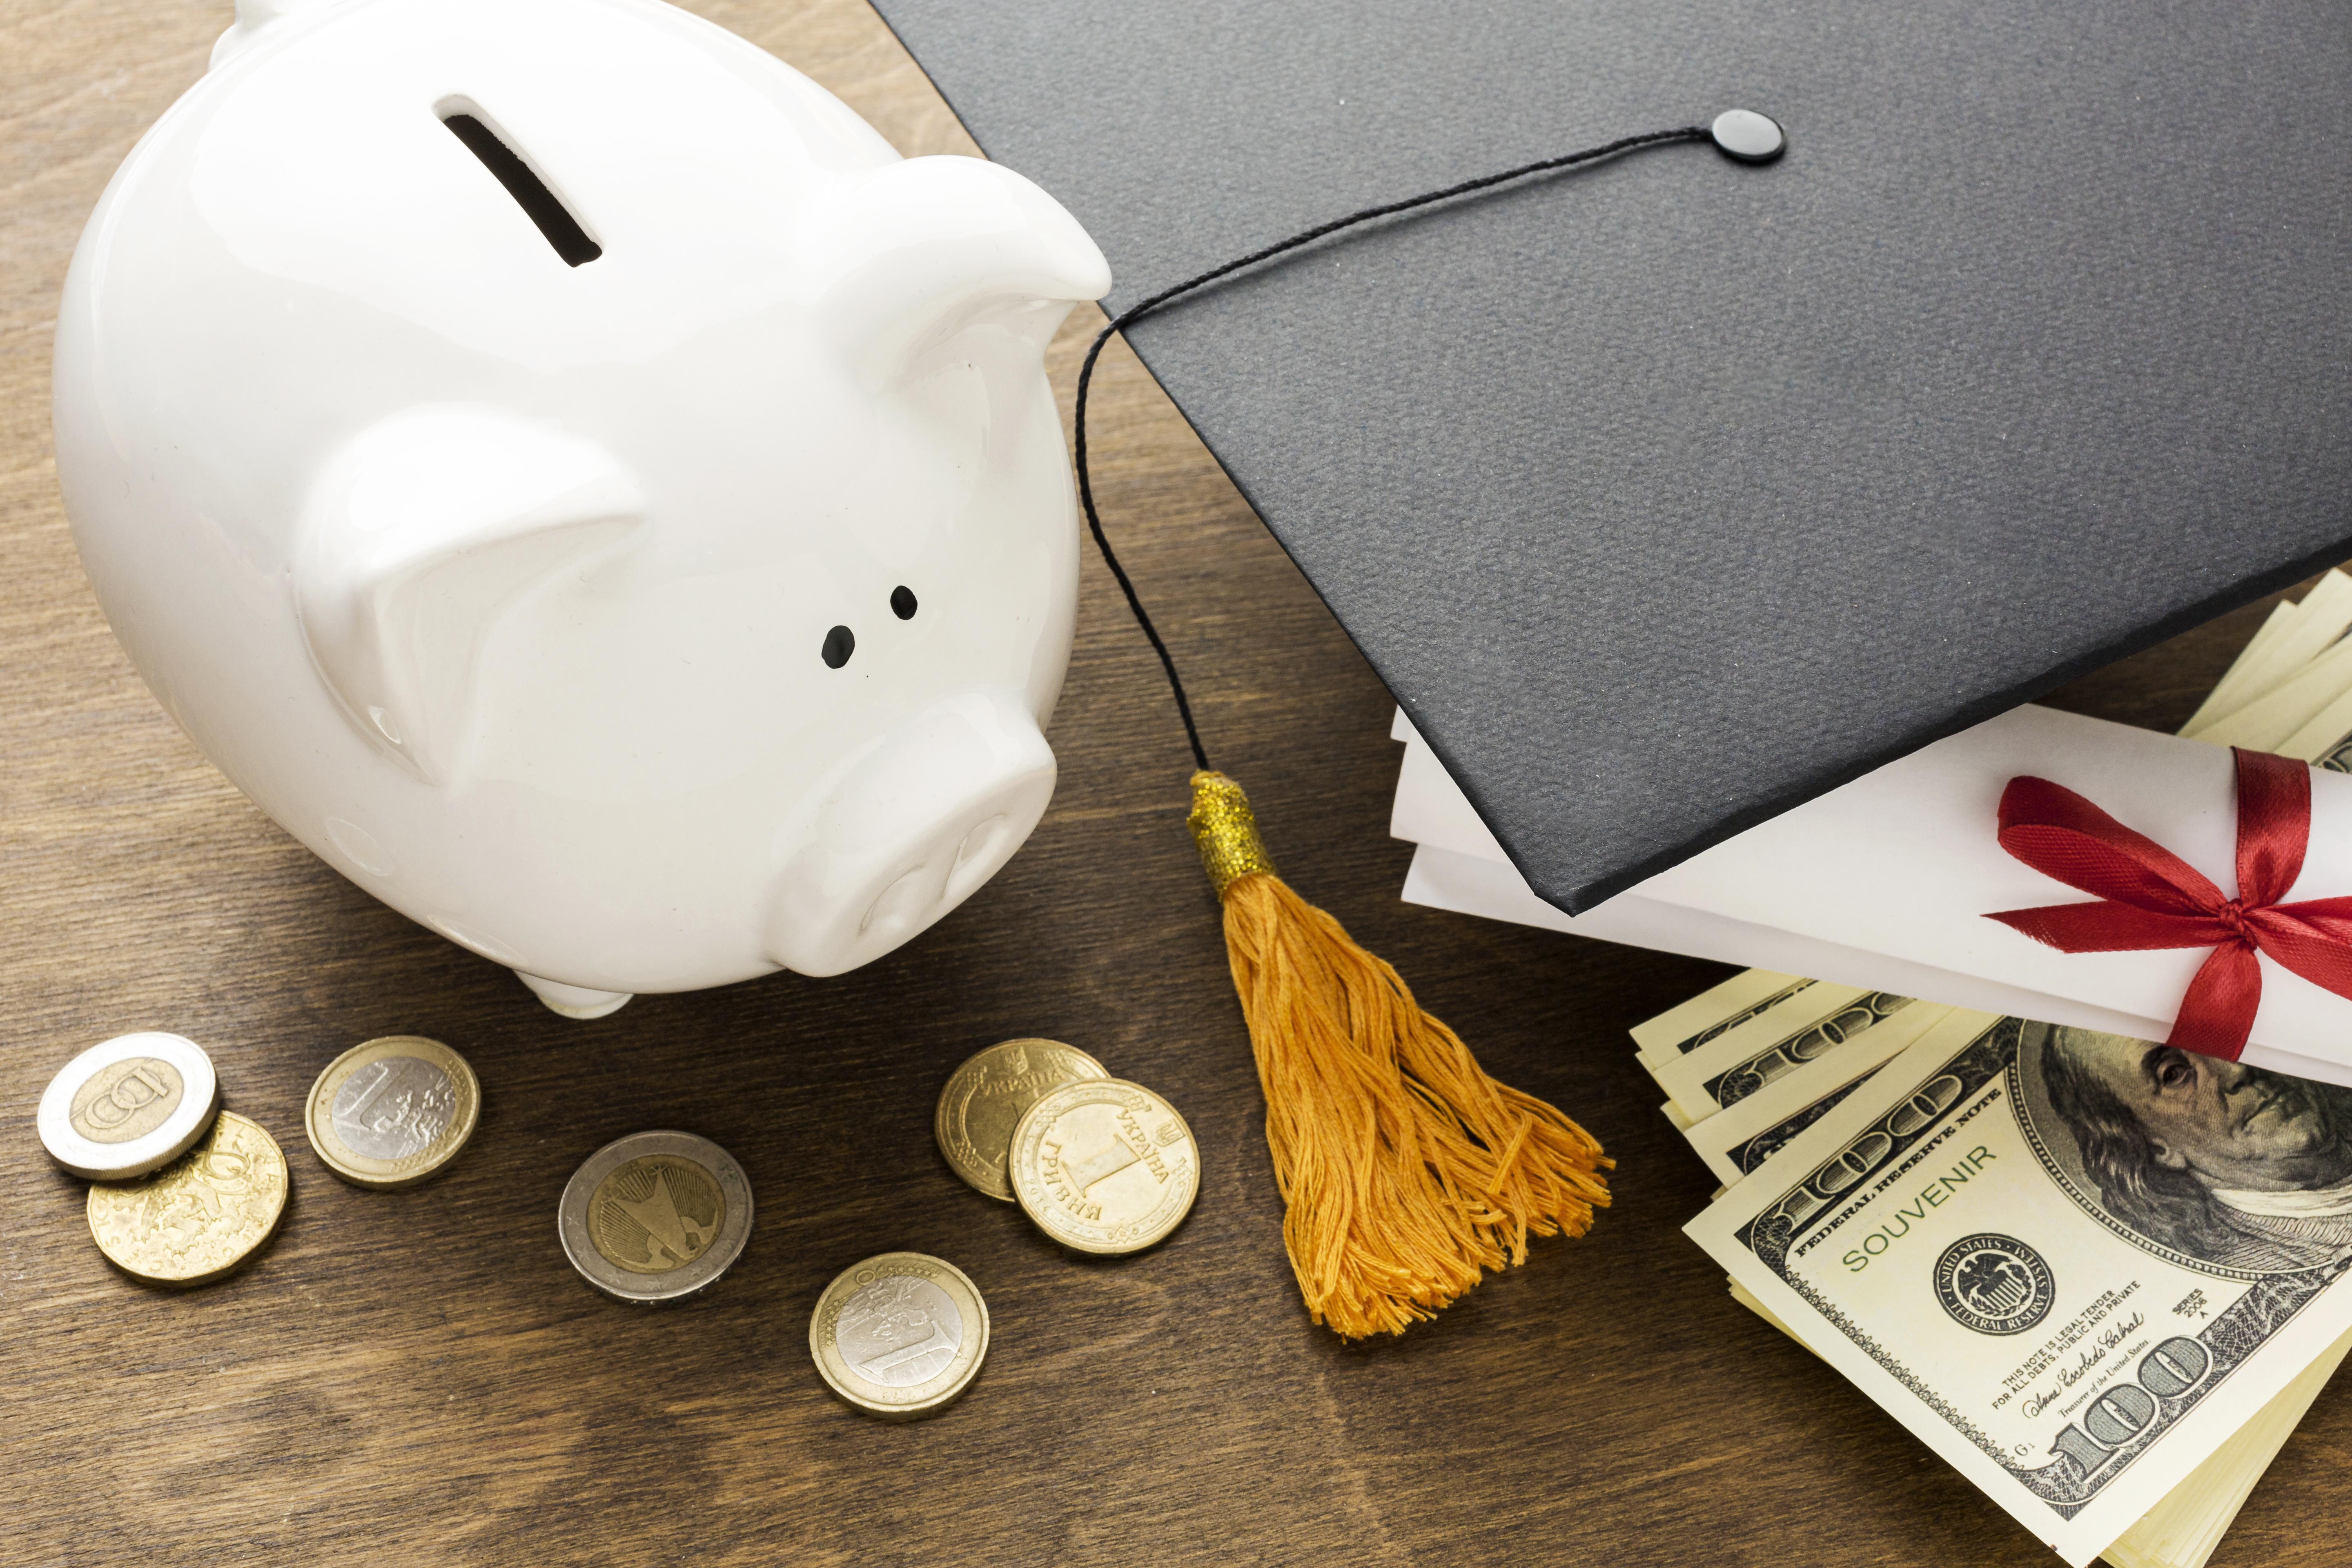 ceramic piggy bank on table with graduation cap, coins, money and diploma